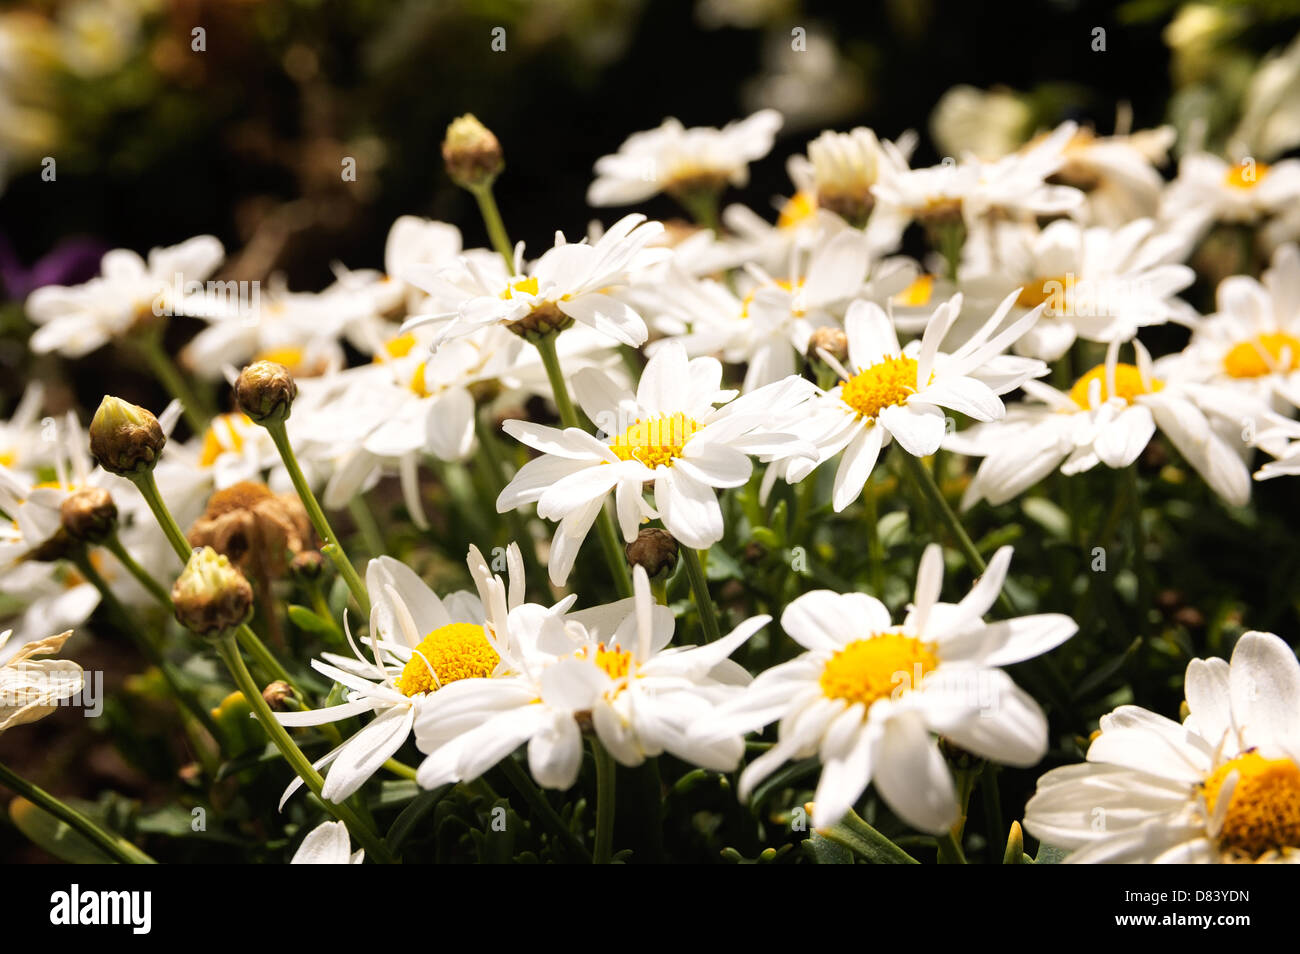 Oxeye daisy, a clear sign of spring. Stock Photo